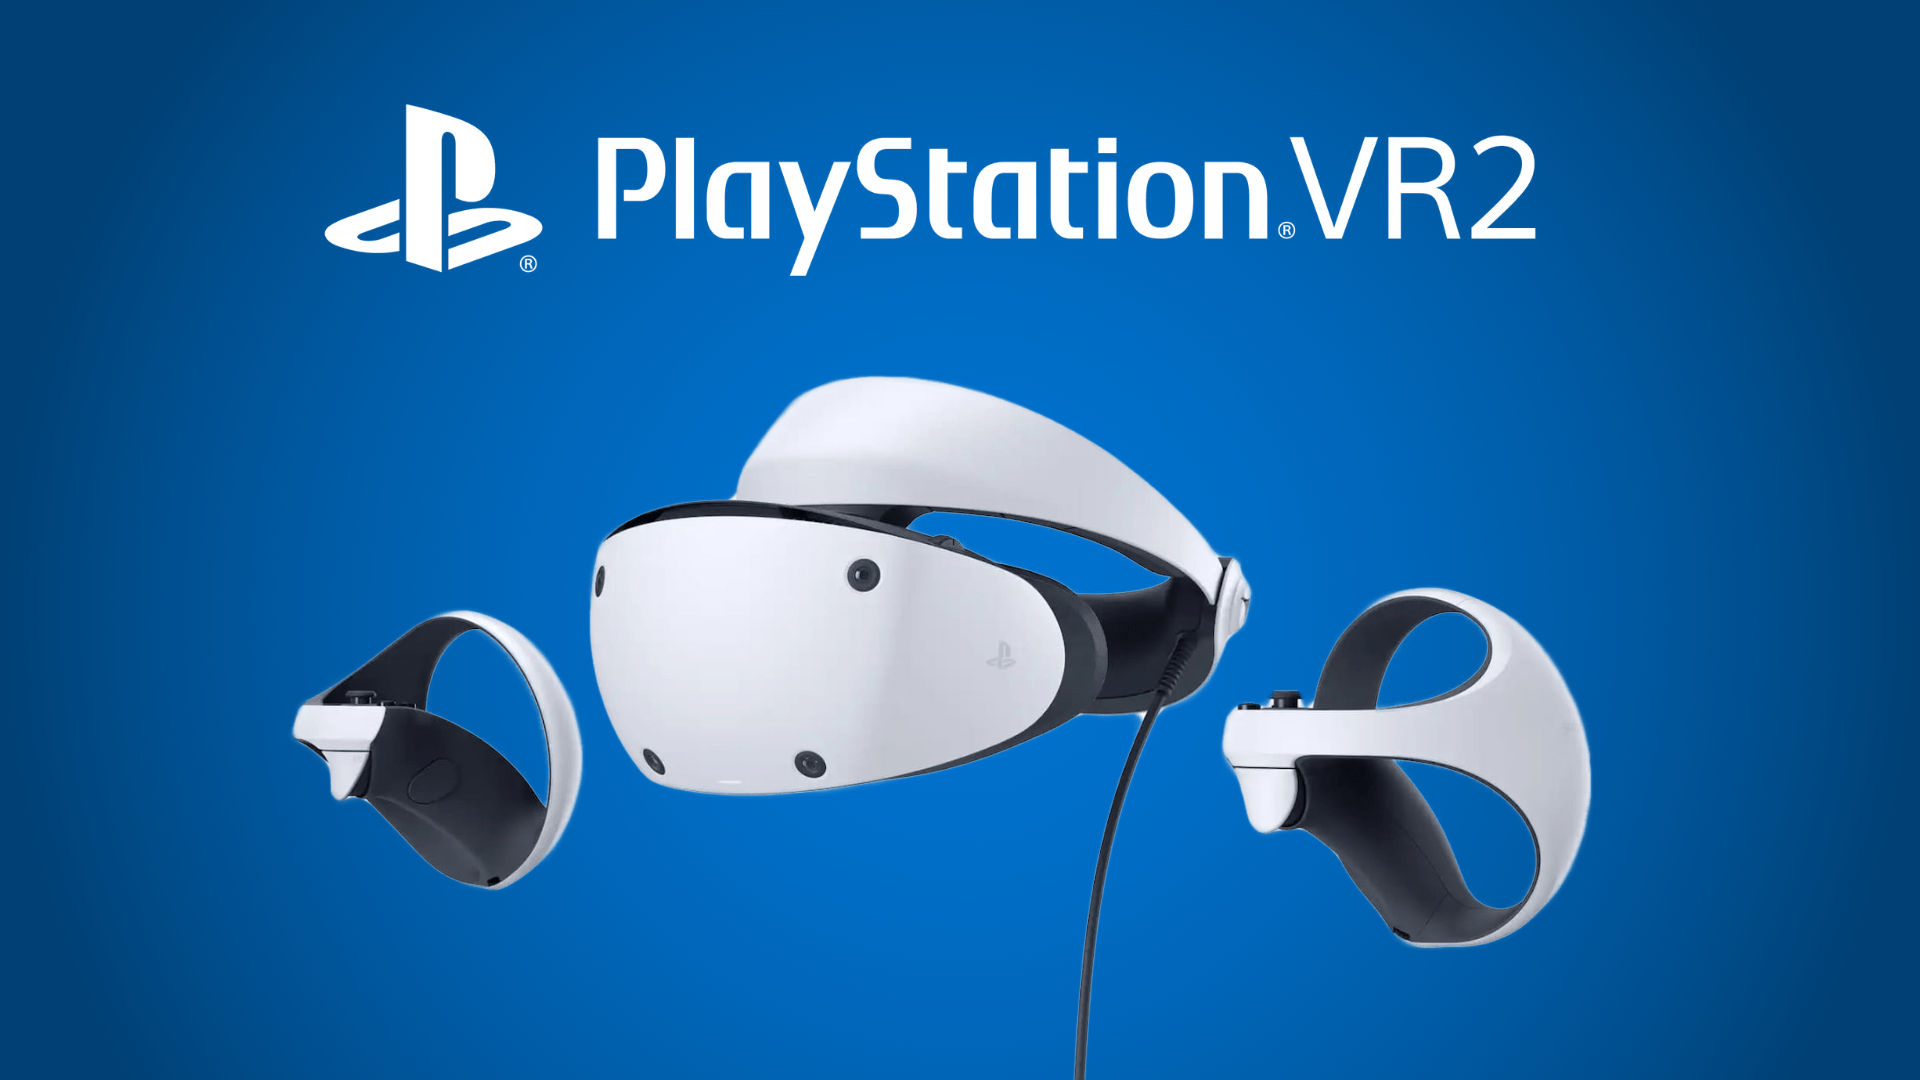 Playstation VR 2: Release, resolution, controller - all you need to know